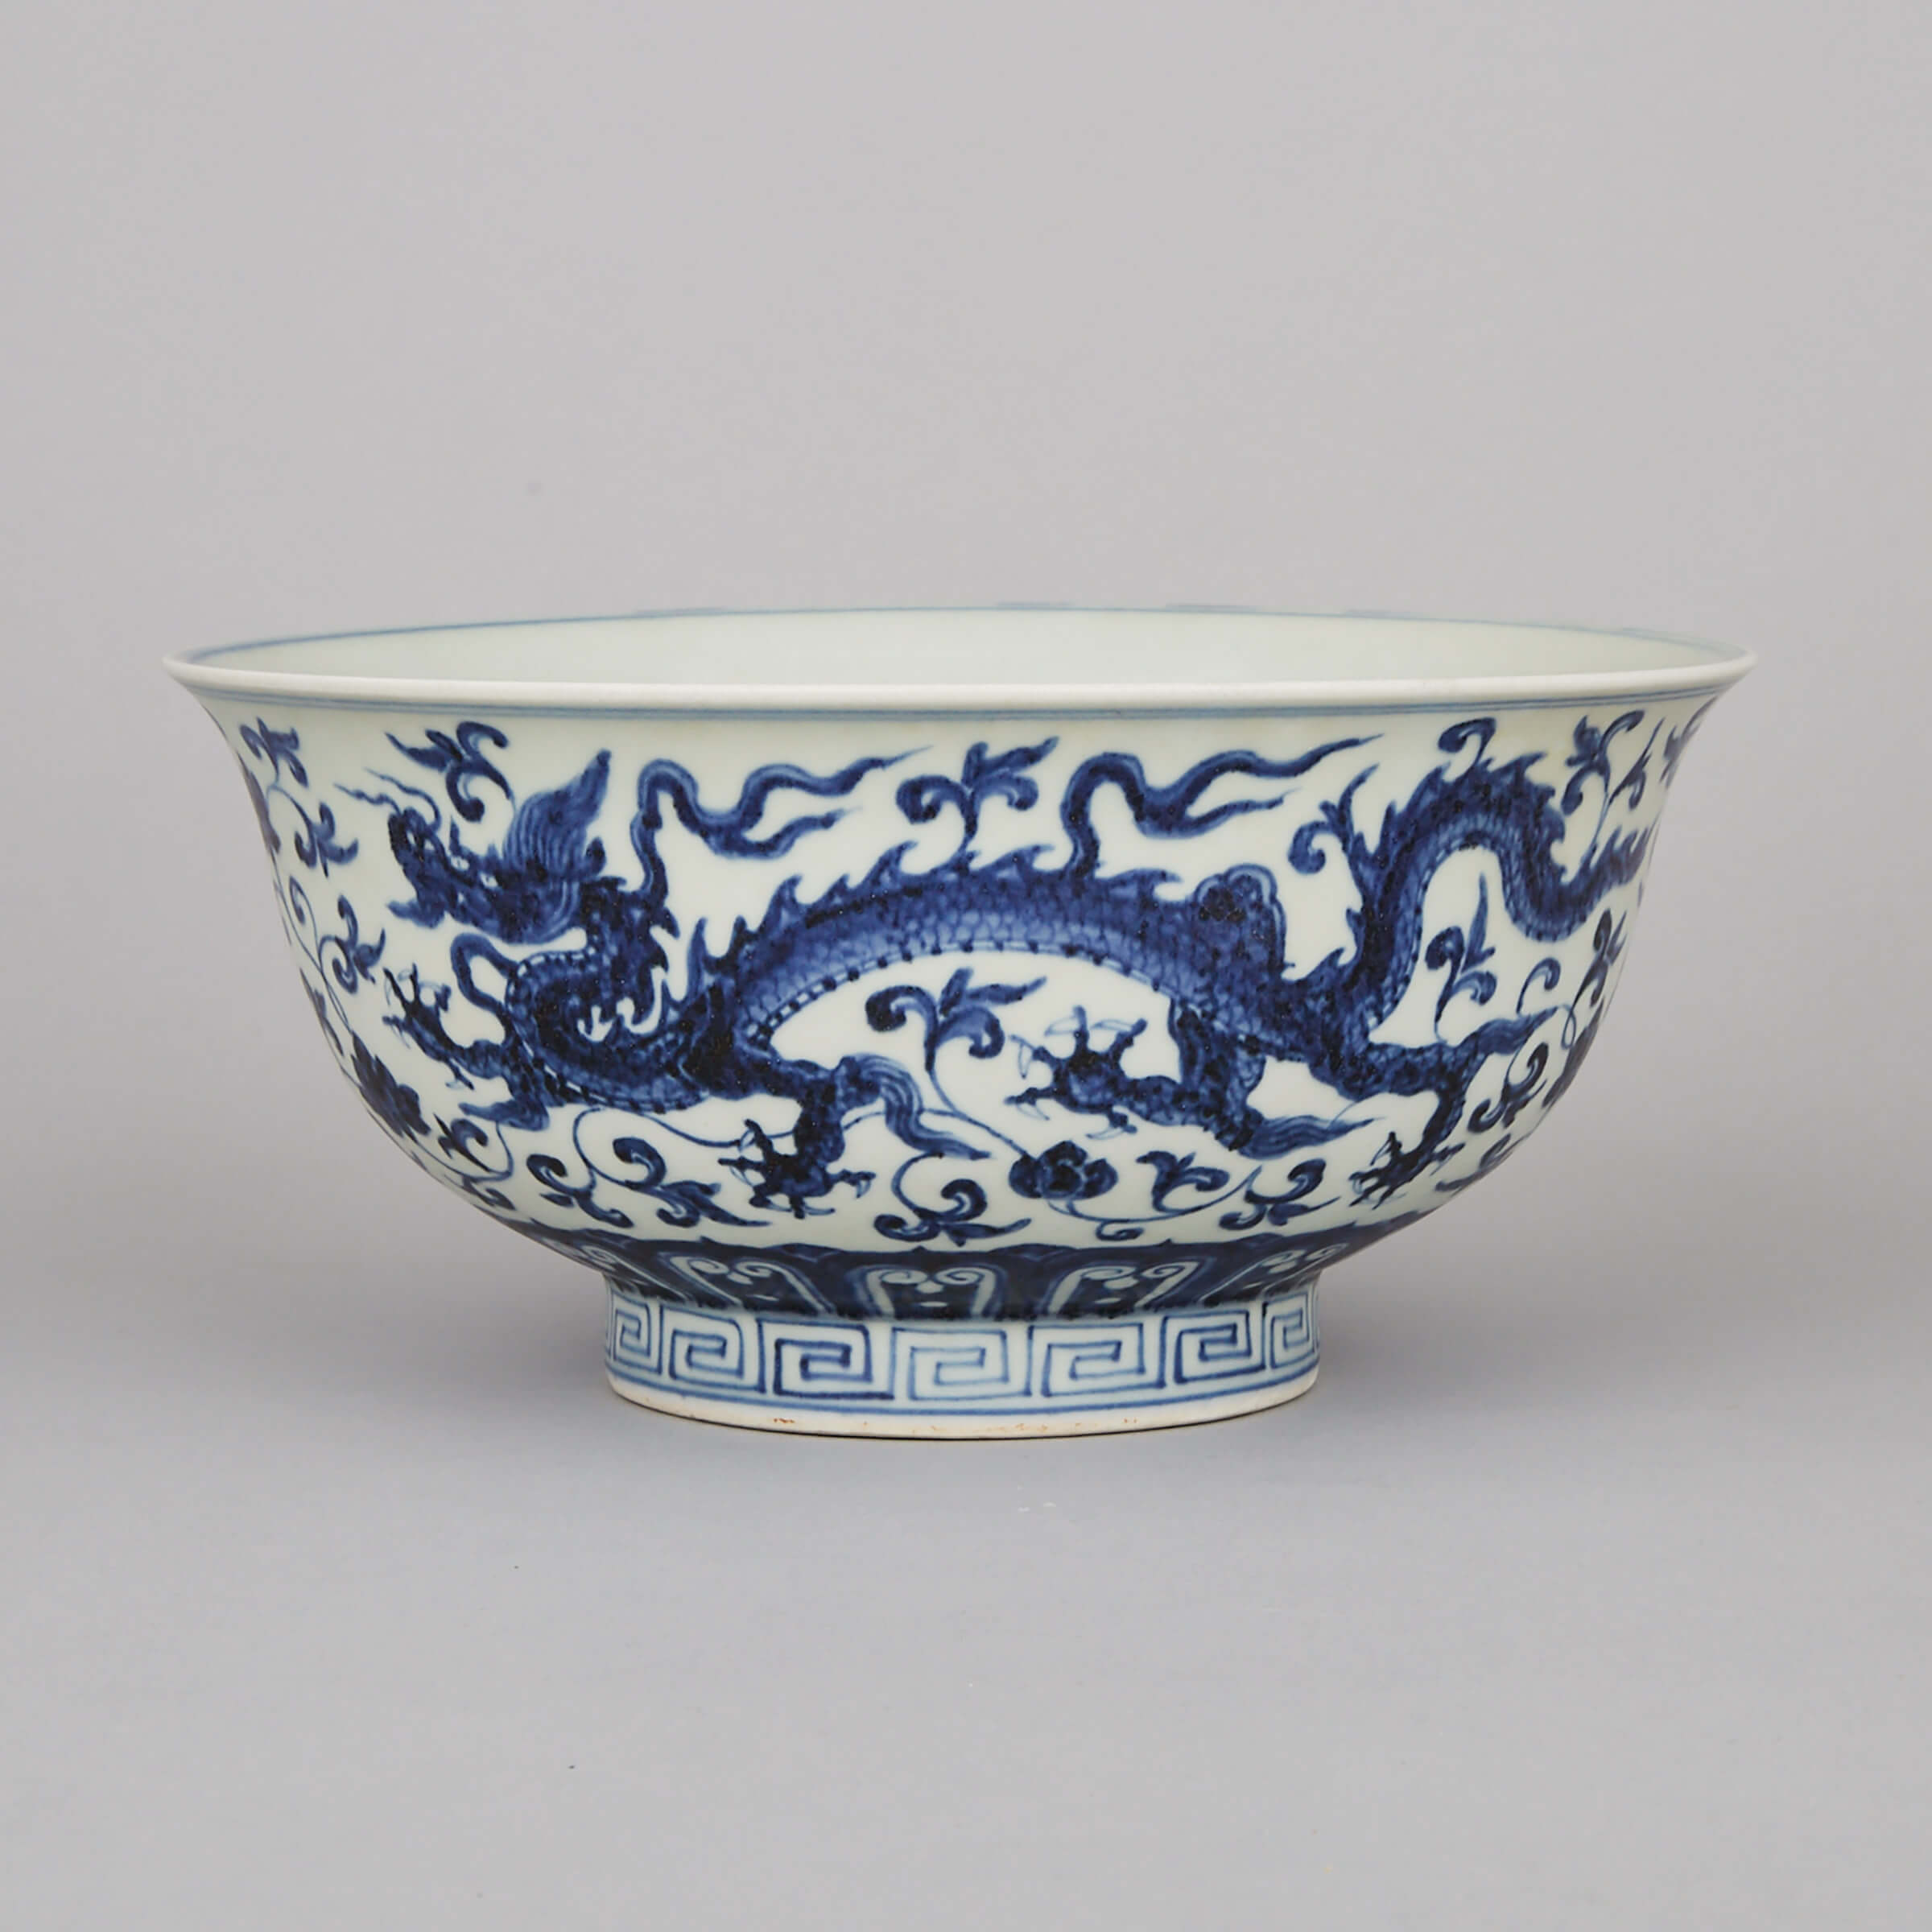 A Ming-Style Blue and White Dragon Bowl